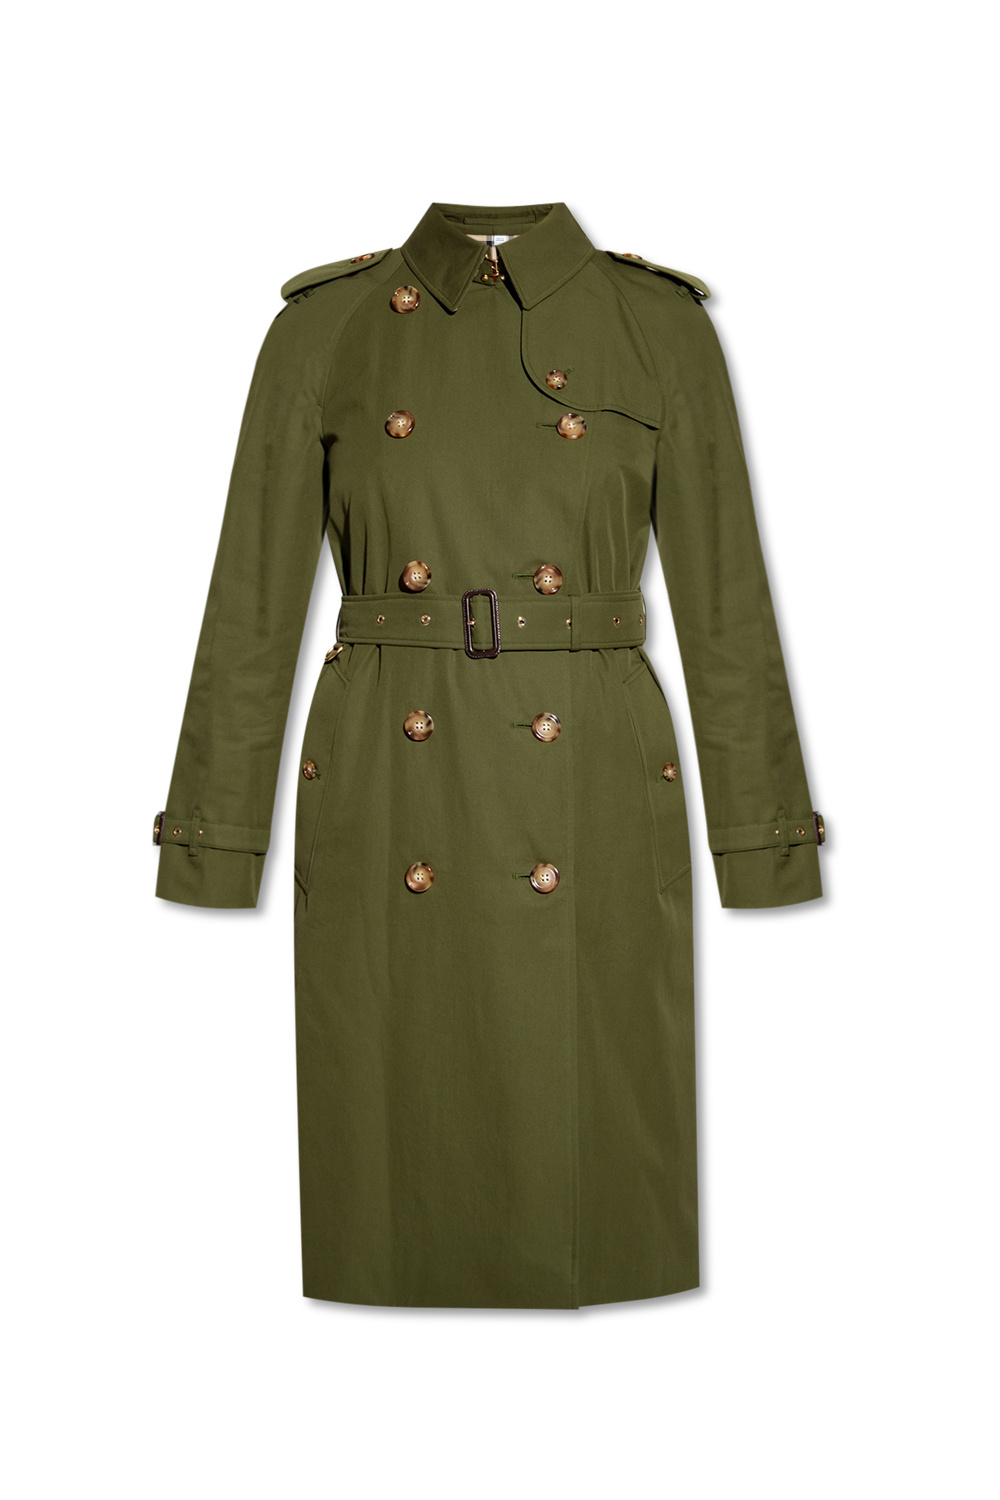 Green 'Waterloo' double-breasted trench coat Burberry - Vitkac Singapore